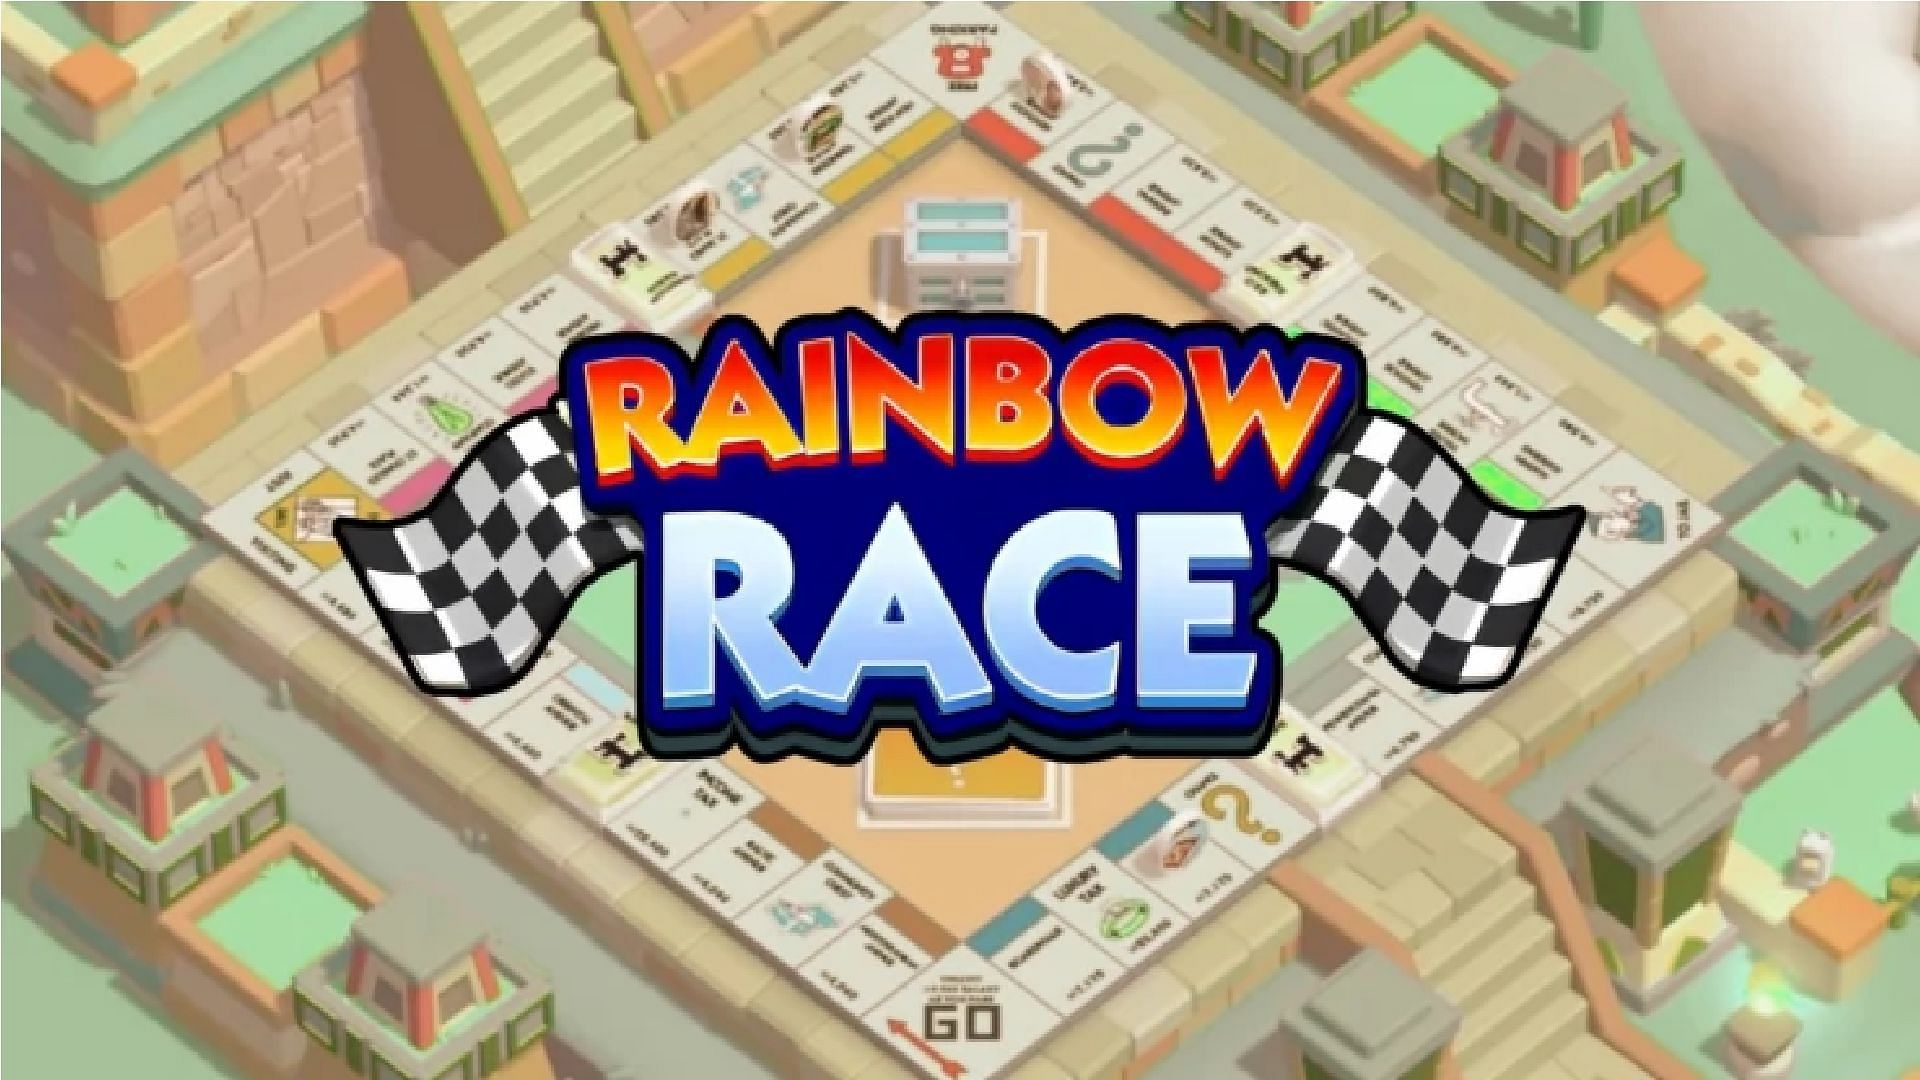 Complete milestones of the daily tournaments like Rainbow Race to get free Pickaxe tokens in Monopoly Go (Image via Scopely)